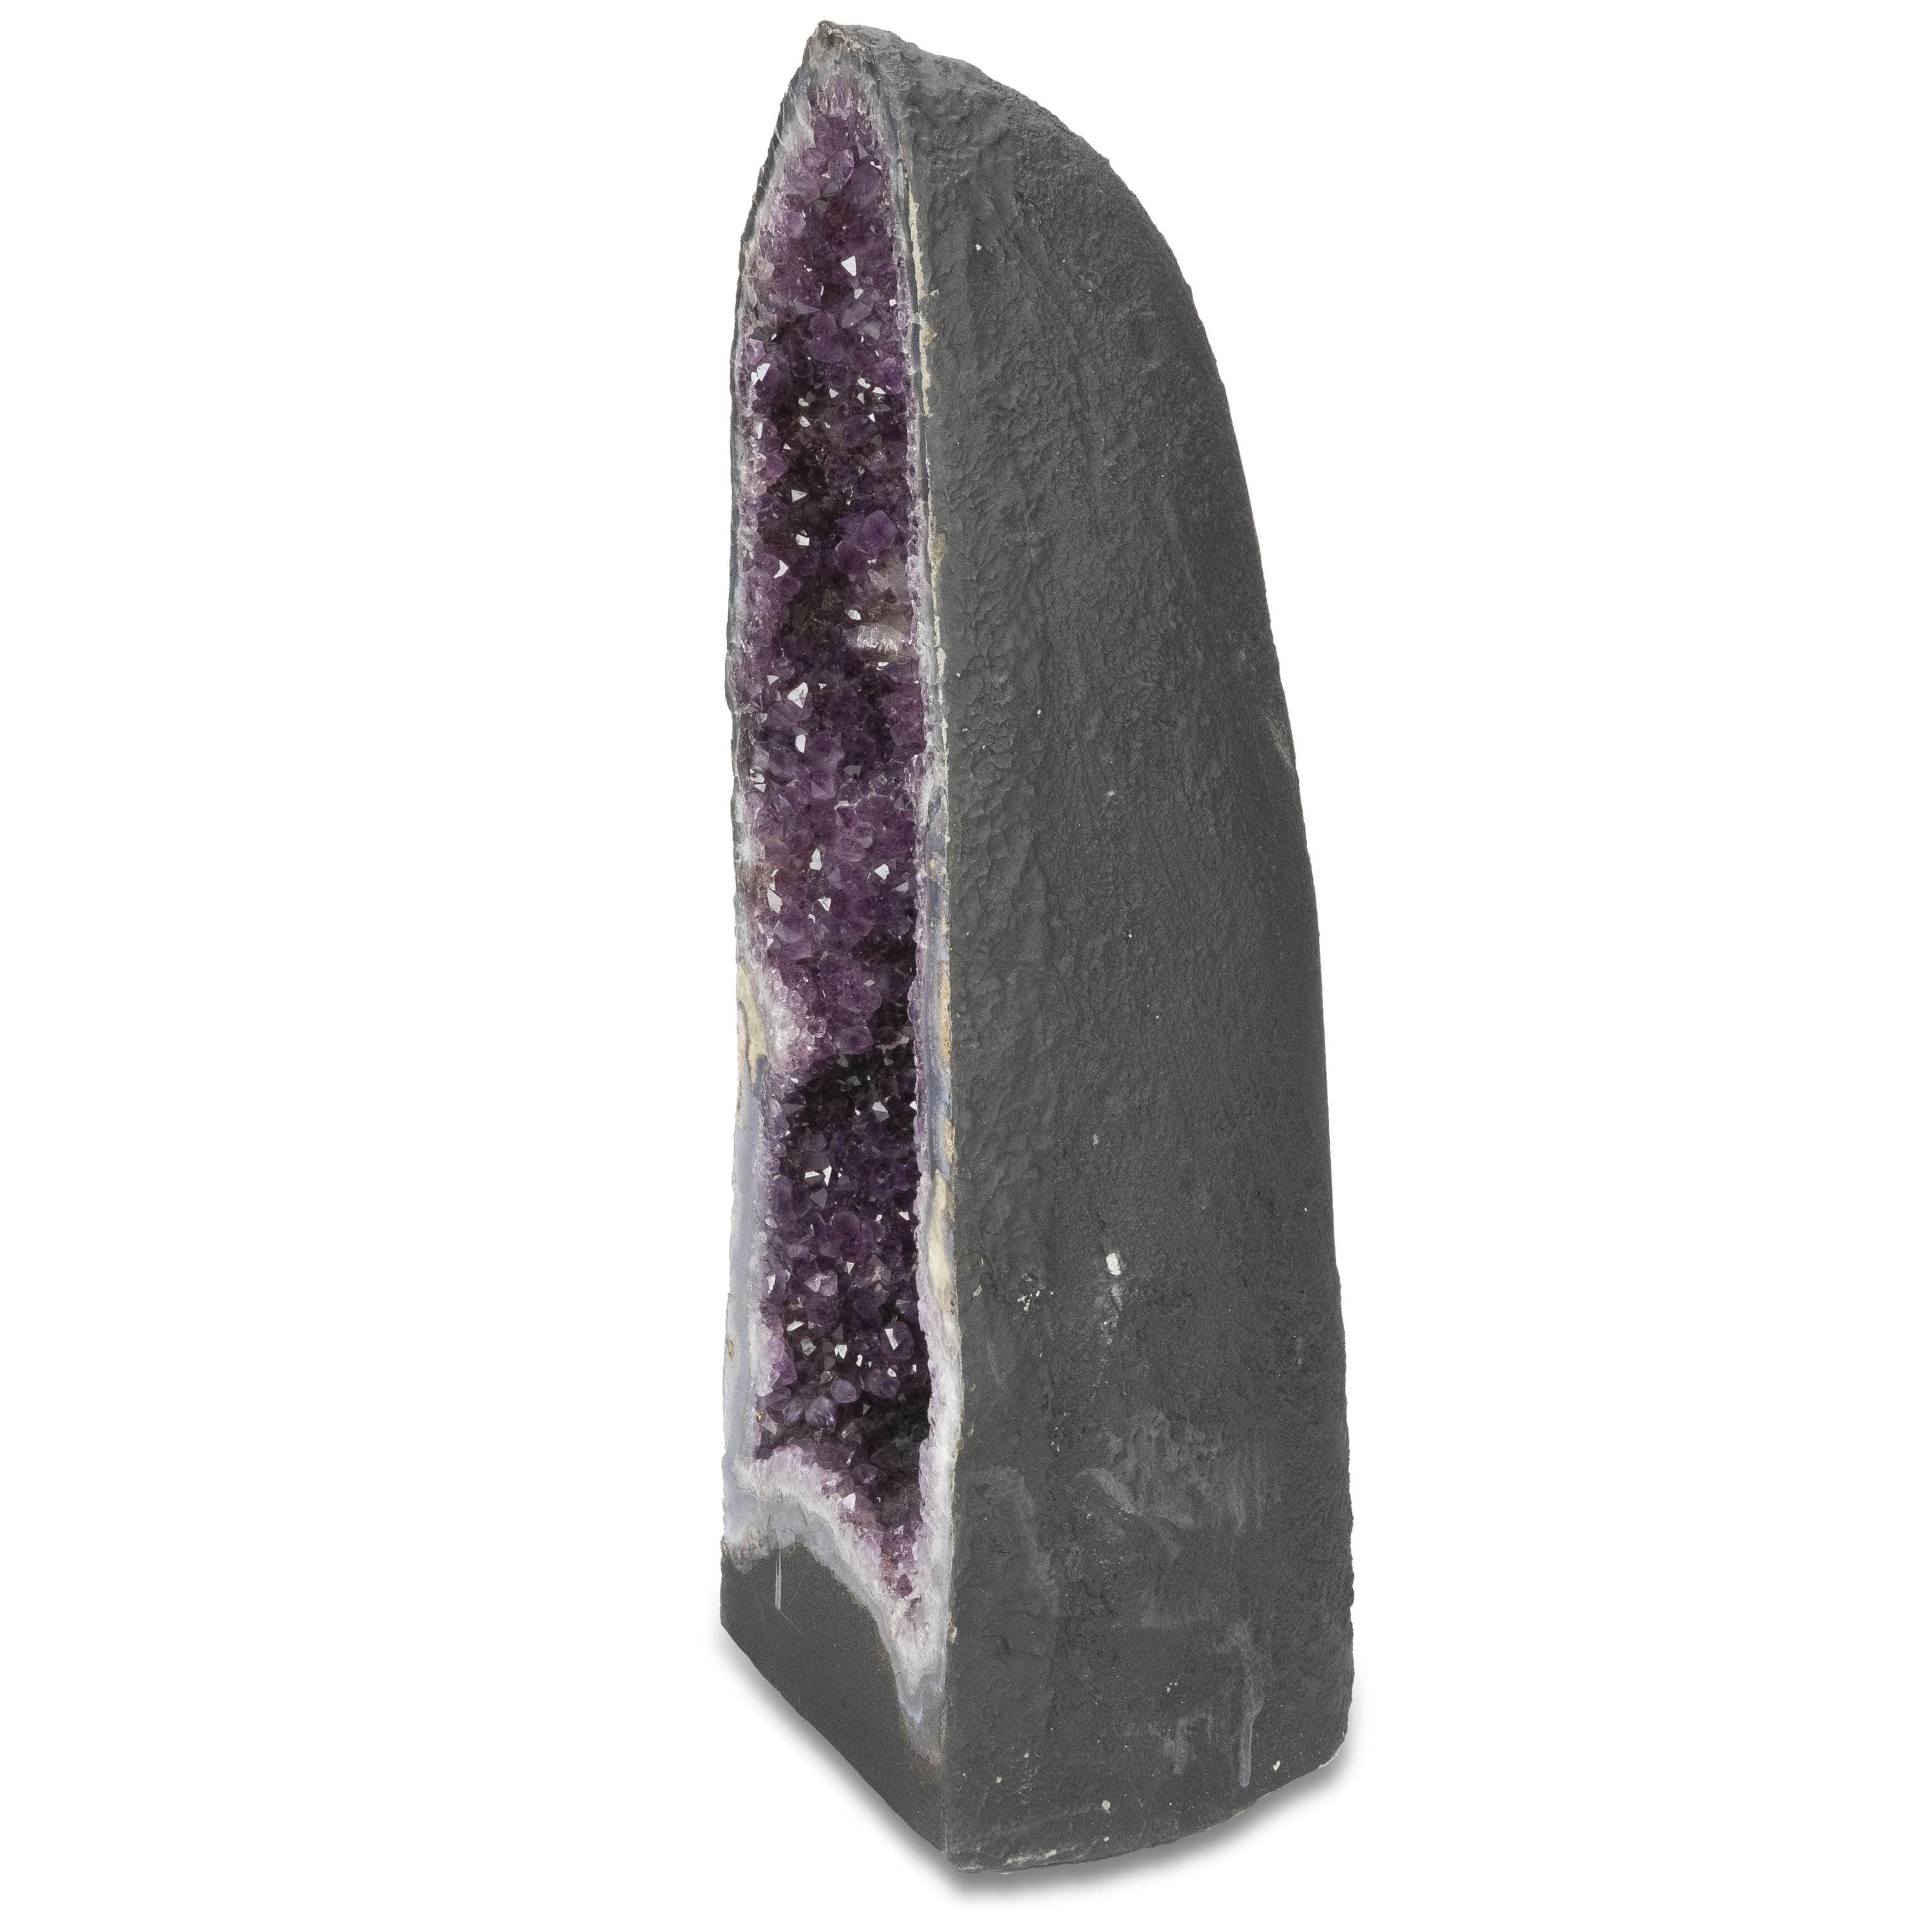 Kalifano Amethyst Amethyst Geode Cathedral - 27" / 75 lbs BAG12400.001